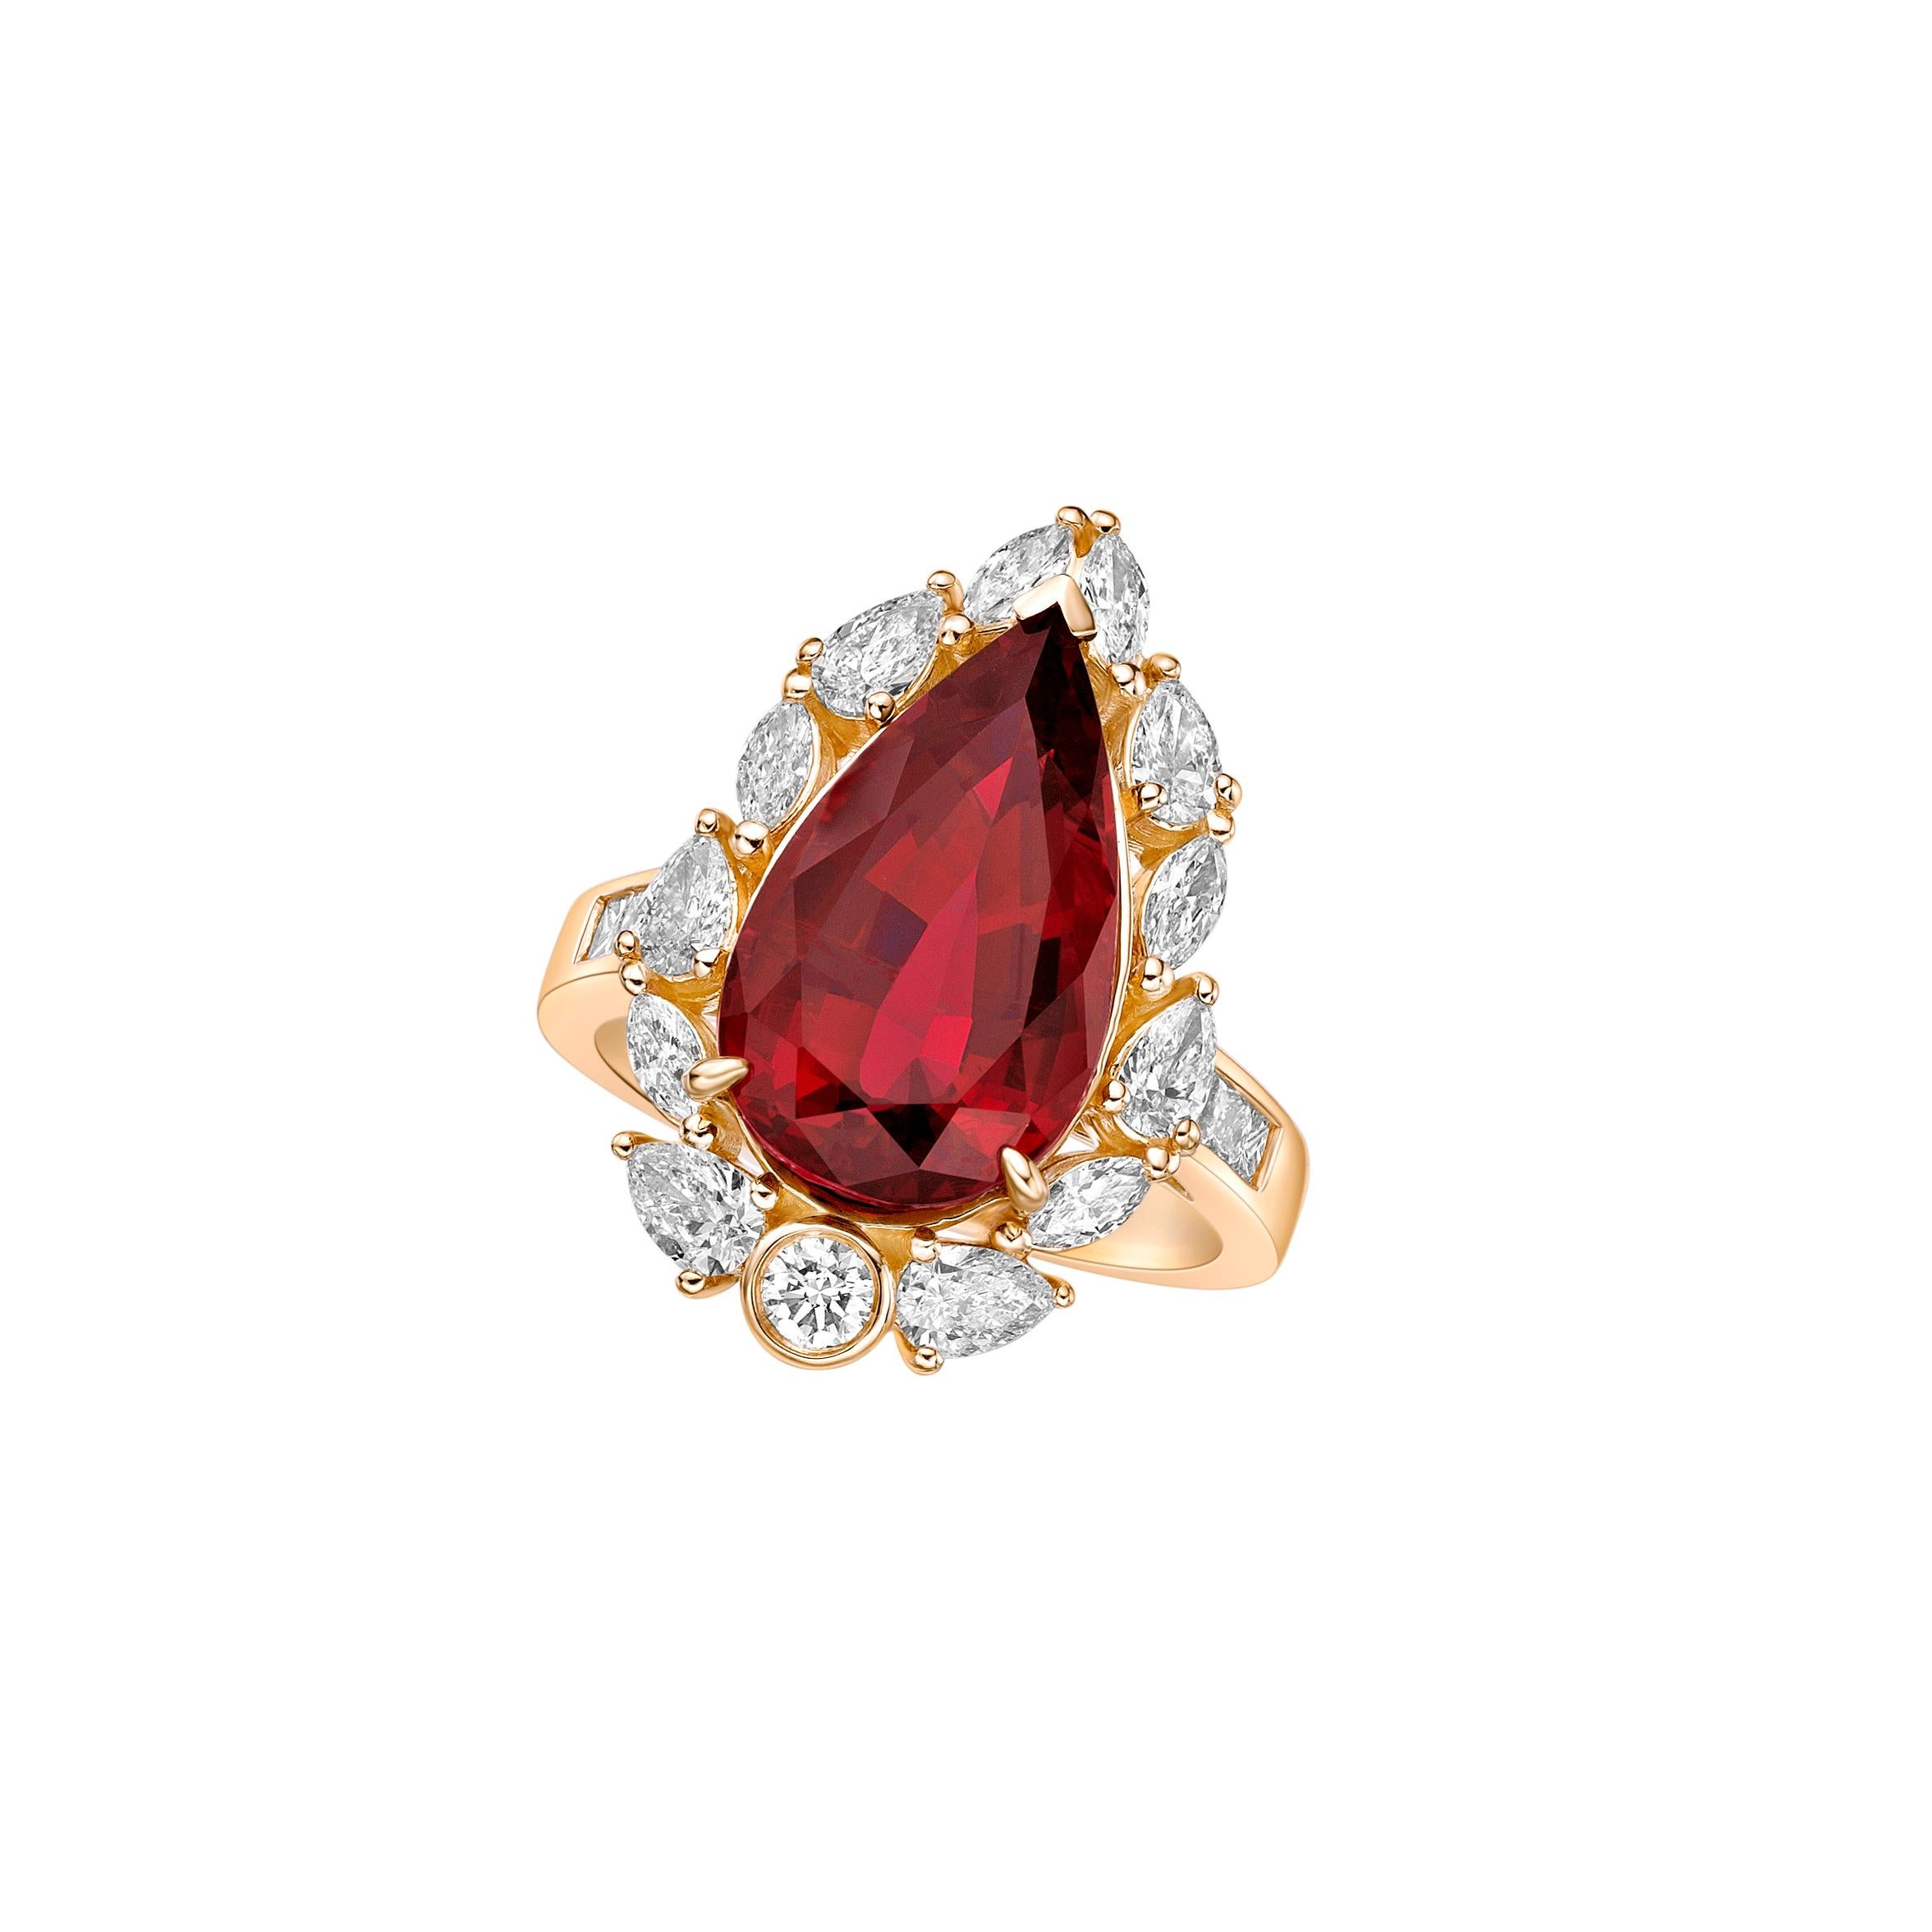 Pear Cut 6.991 Carat Rubelite Fancy Ring in 18Karat Yellow Gold with White Diamond. For Sale